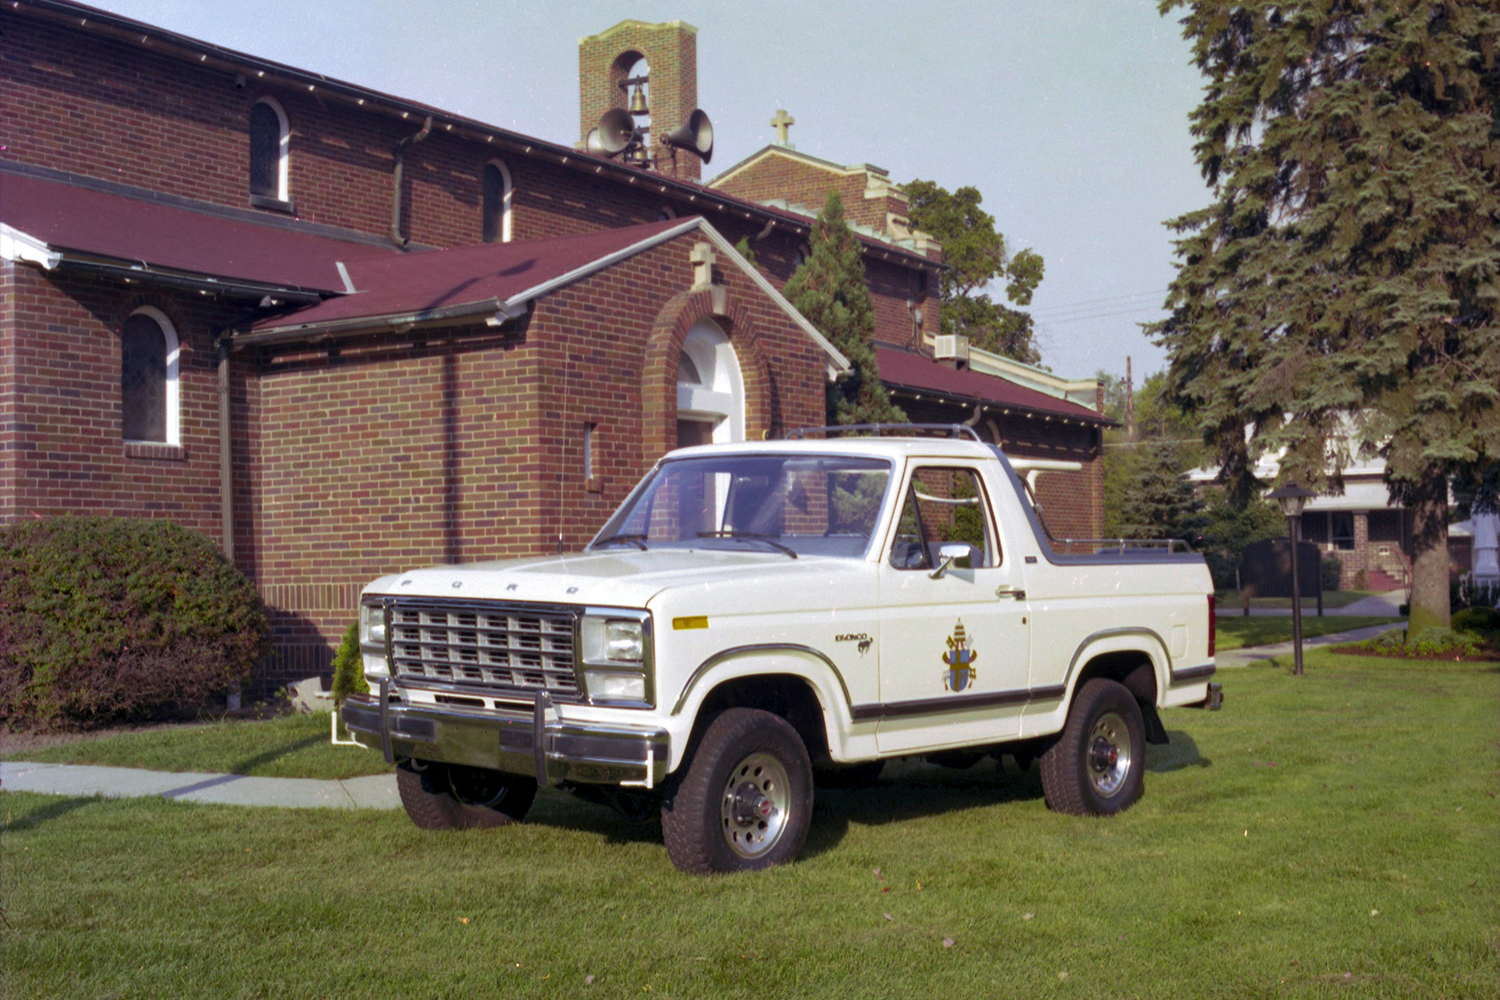 The 1980 Ford Bronco the automaker had customized as a popemobile for Pope John Paul II's 1979 visit to New York City